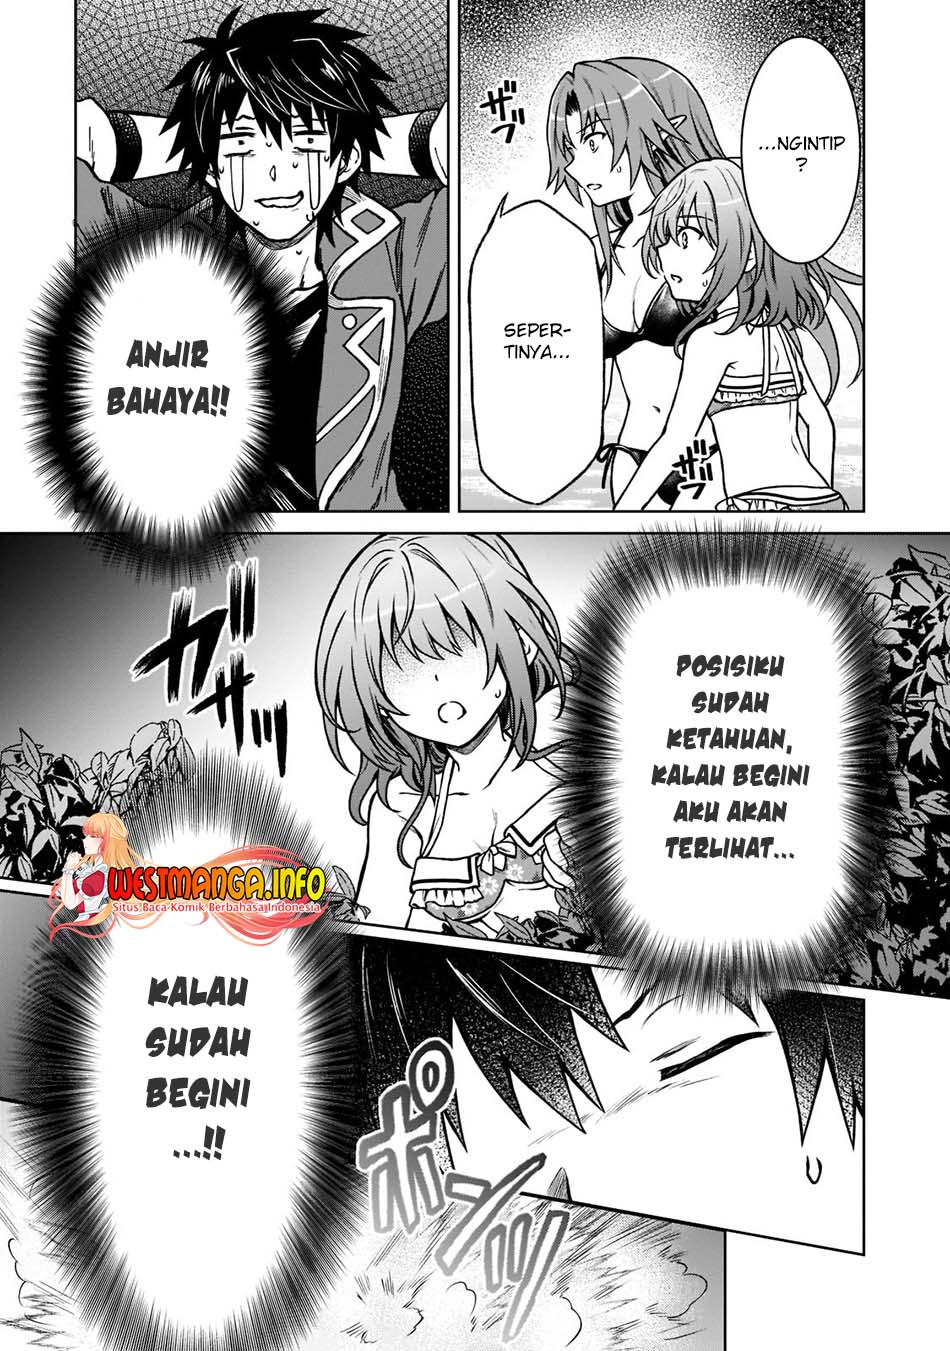 Dilarang COPAS - situs resmi www.mangacanblog.com - Komik d rank adventurer invited by a brave party and the stalking princess 008 - chapter 8 9 Indonesia d rank adventurer invited by a brave party and the stalking princess 008 - chapter 8 Terbaru 13|Baca Manga Komik Indonesia|Mangacan